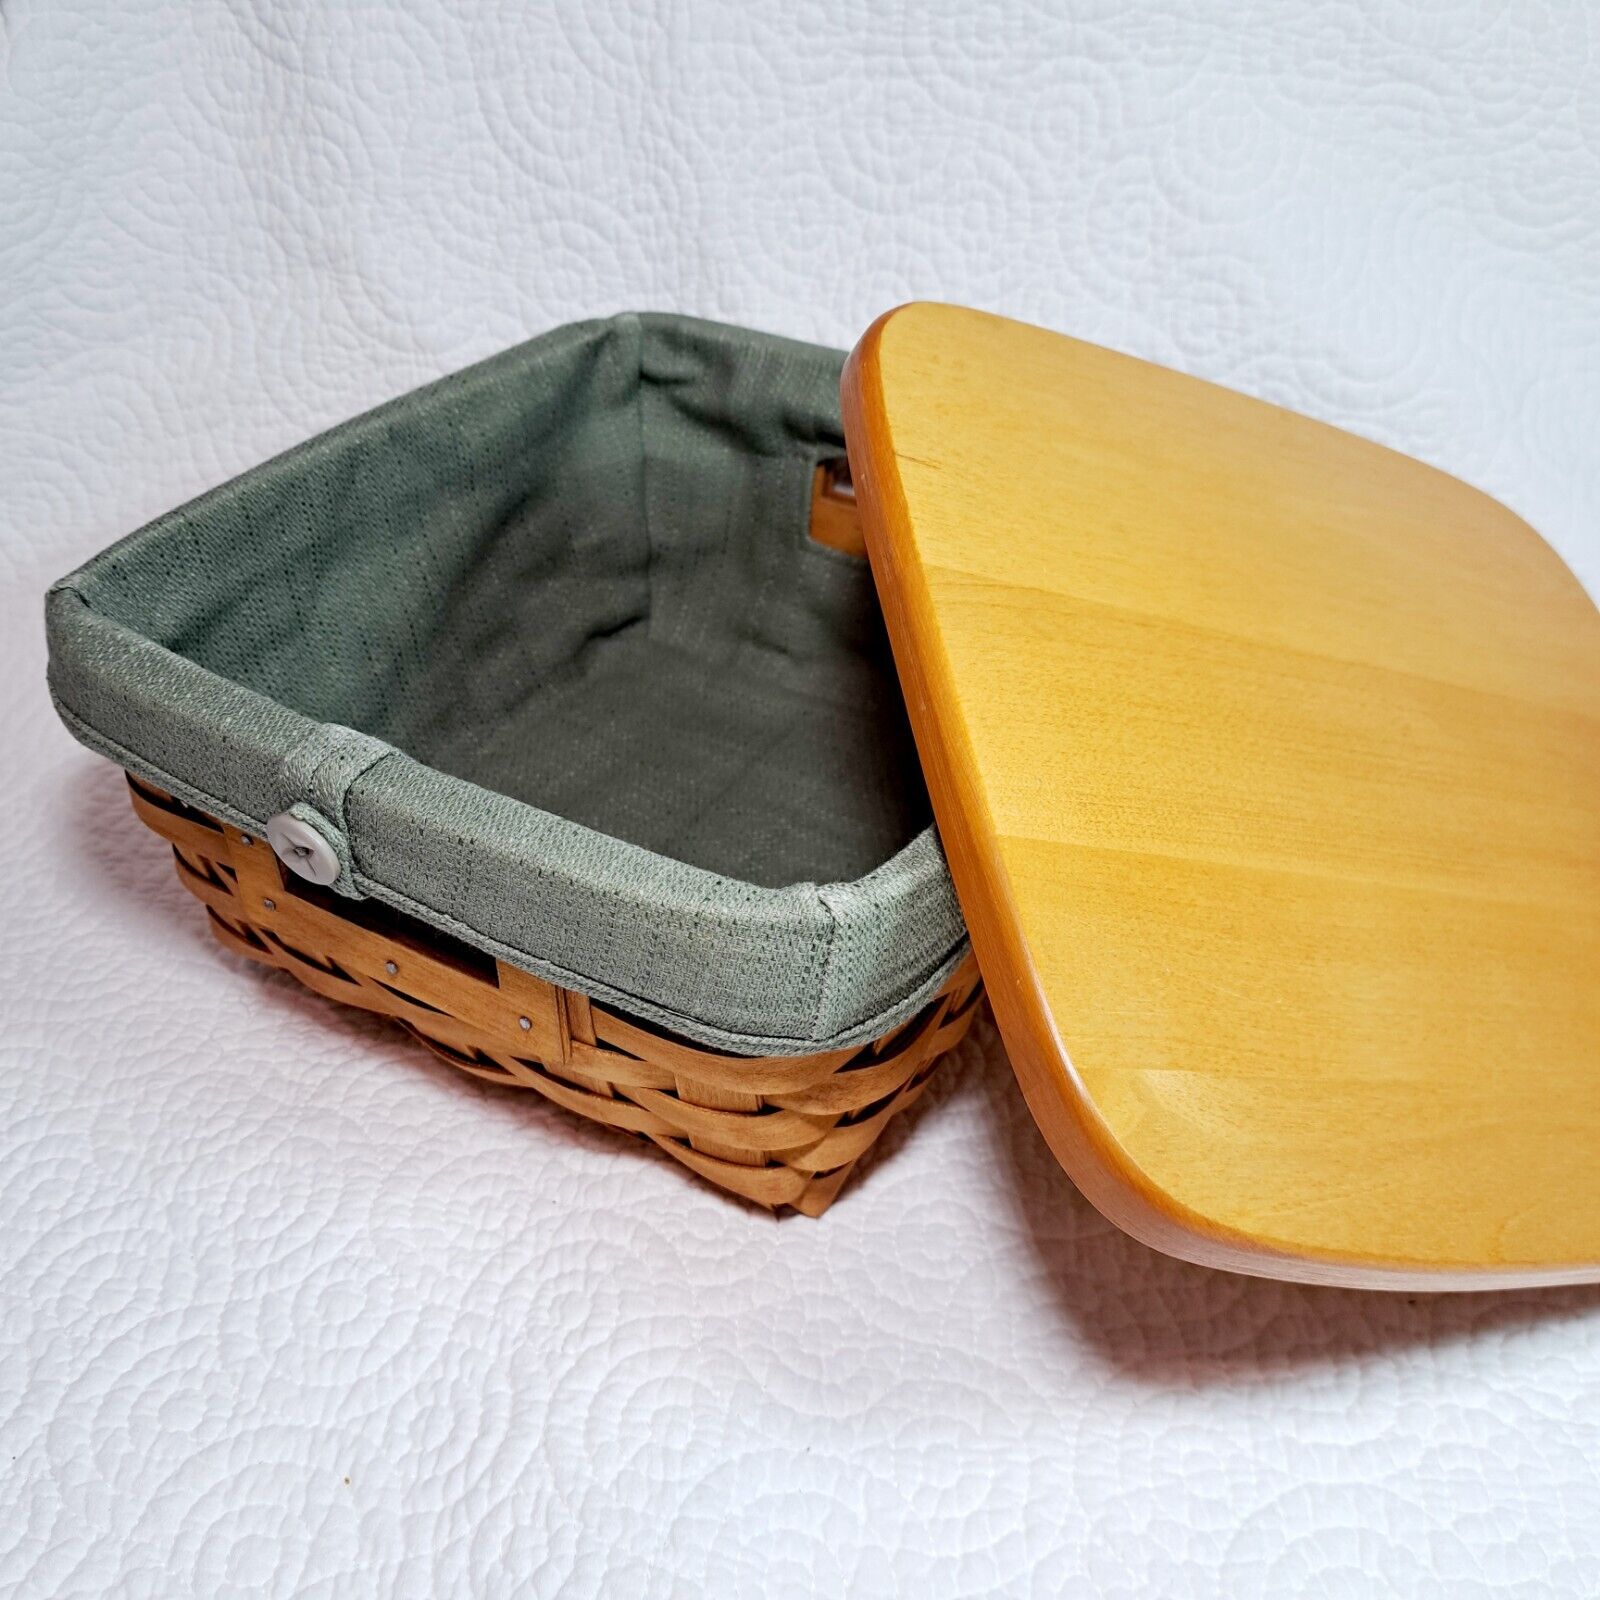 LONGABERGER 2005 Small Storage Solutions Basket w/ Wood Lid & Green Fabric Liner